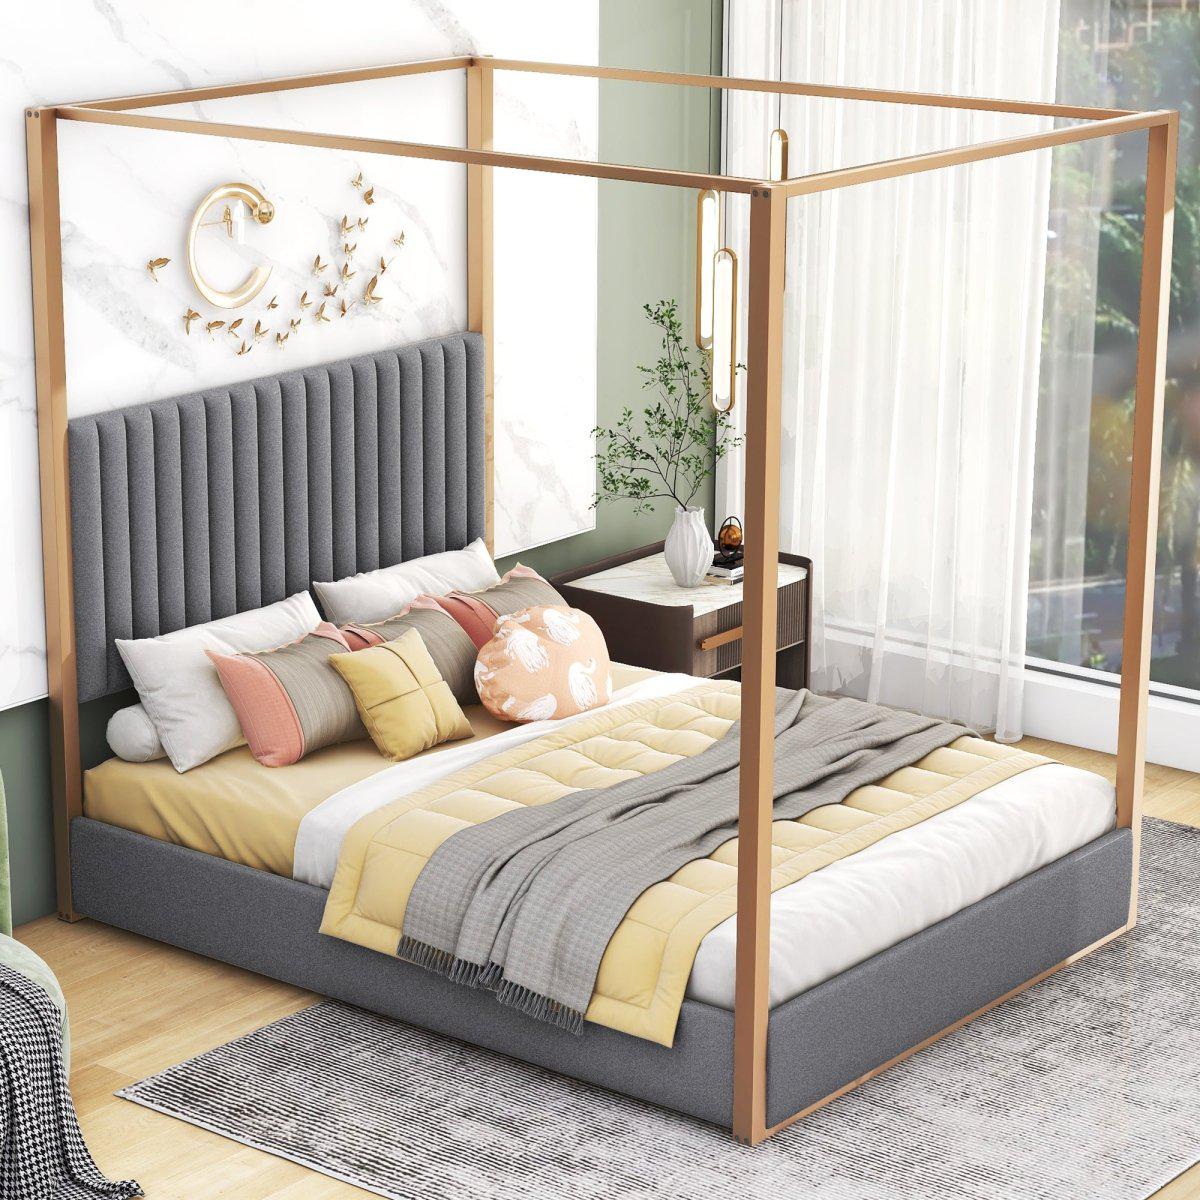 Restoration Style Queen Size Upholstery Canopy Platform Bed with Headboard